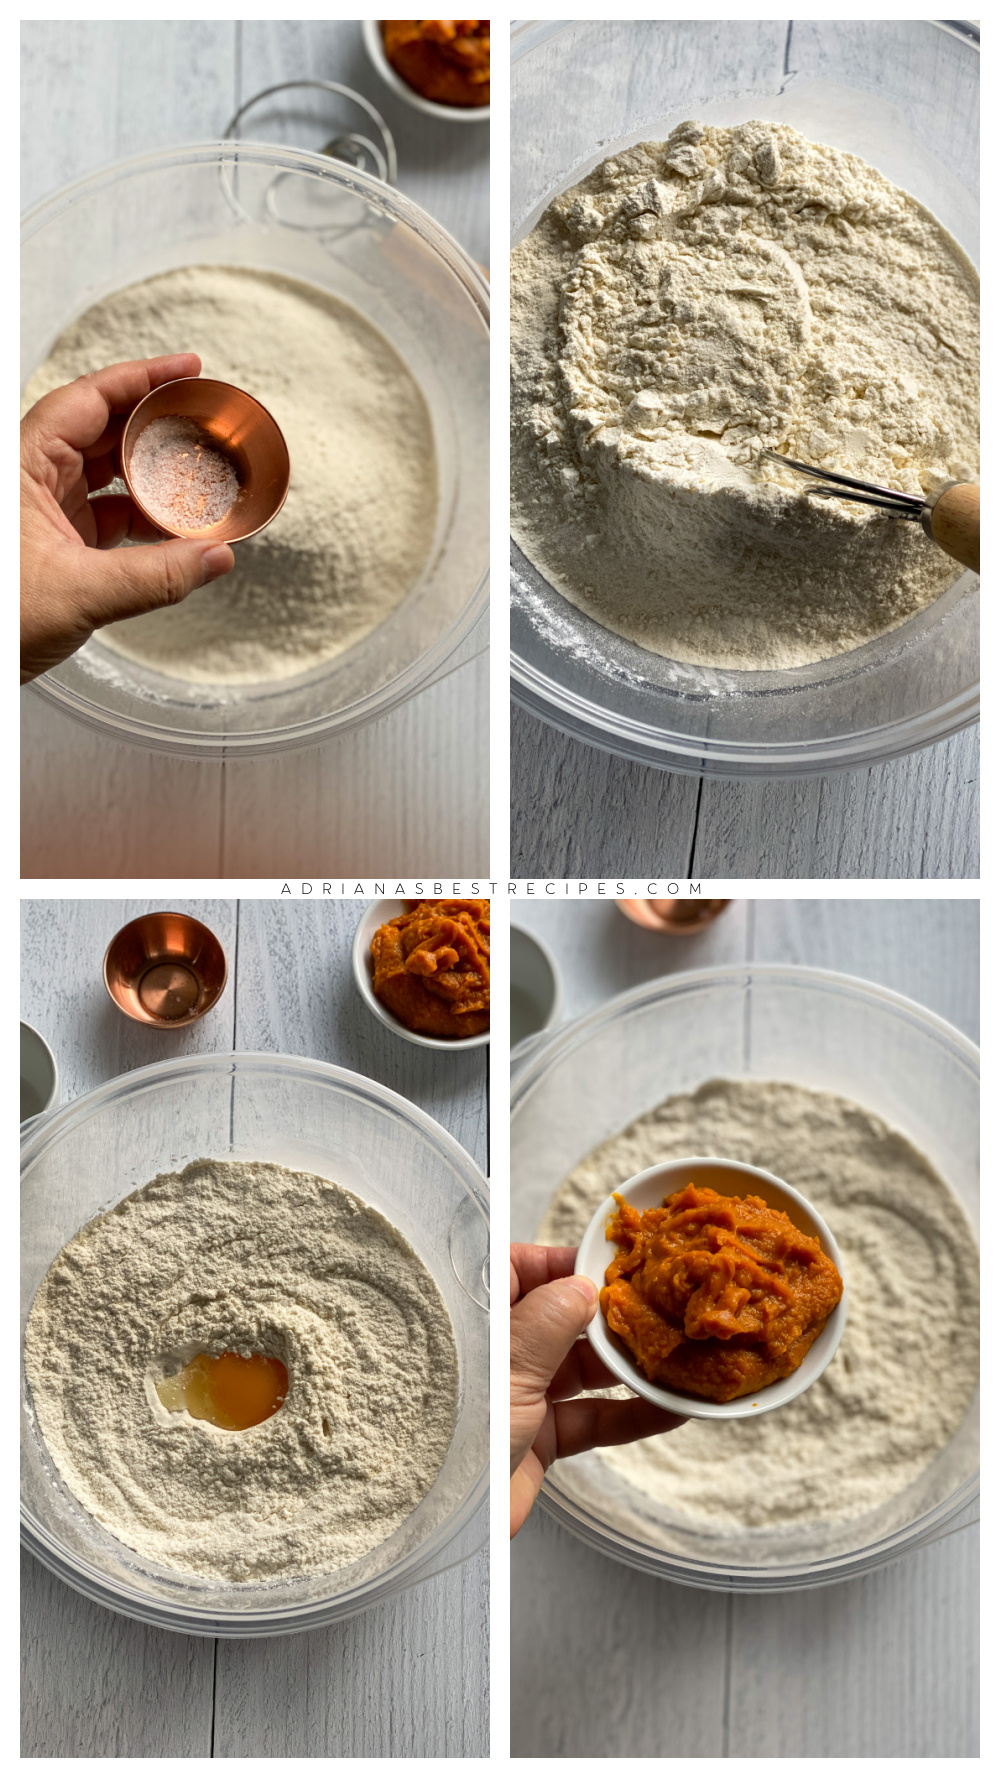 Step by step on how to make the dough for the rolls